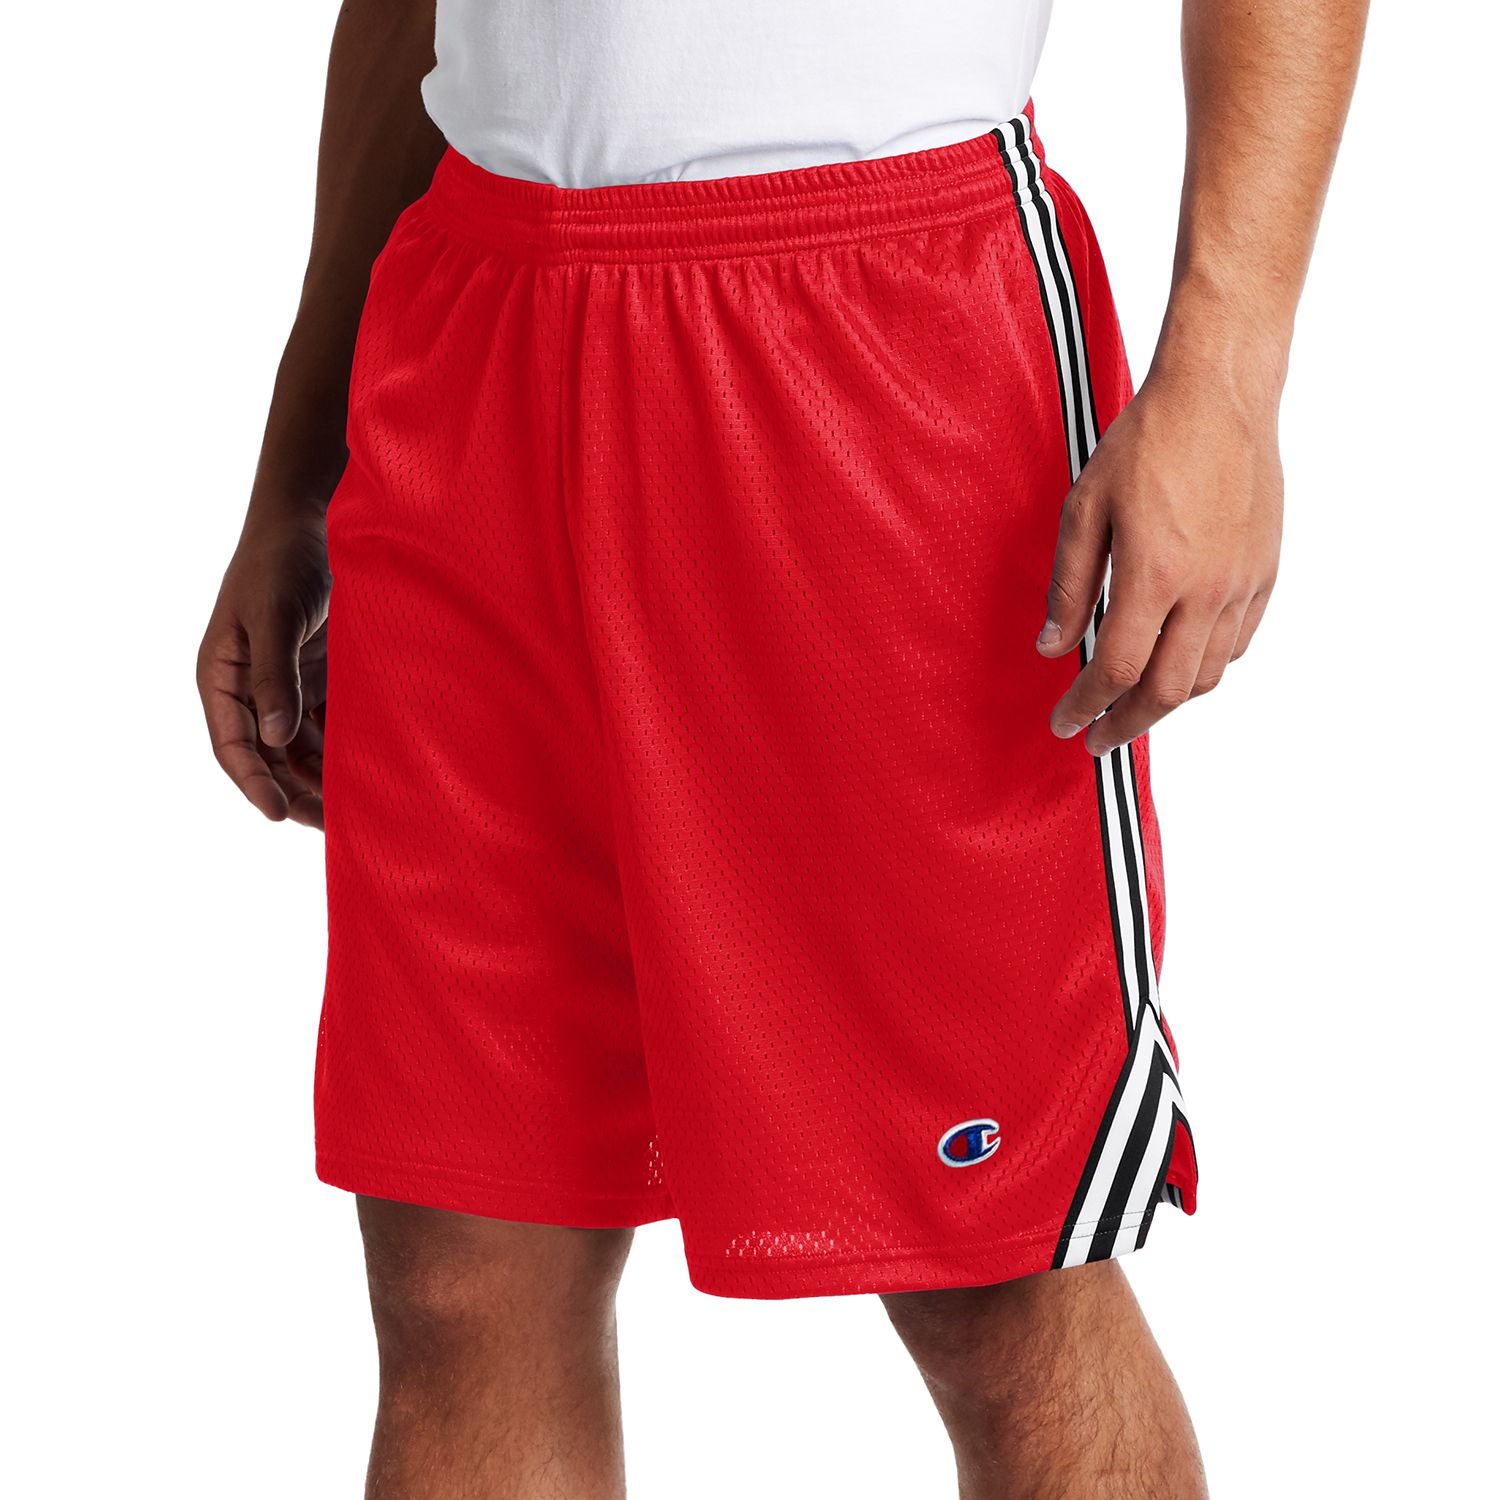 cycling shorts for sale near me